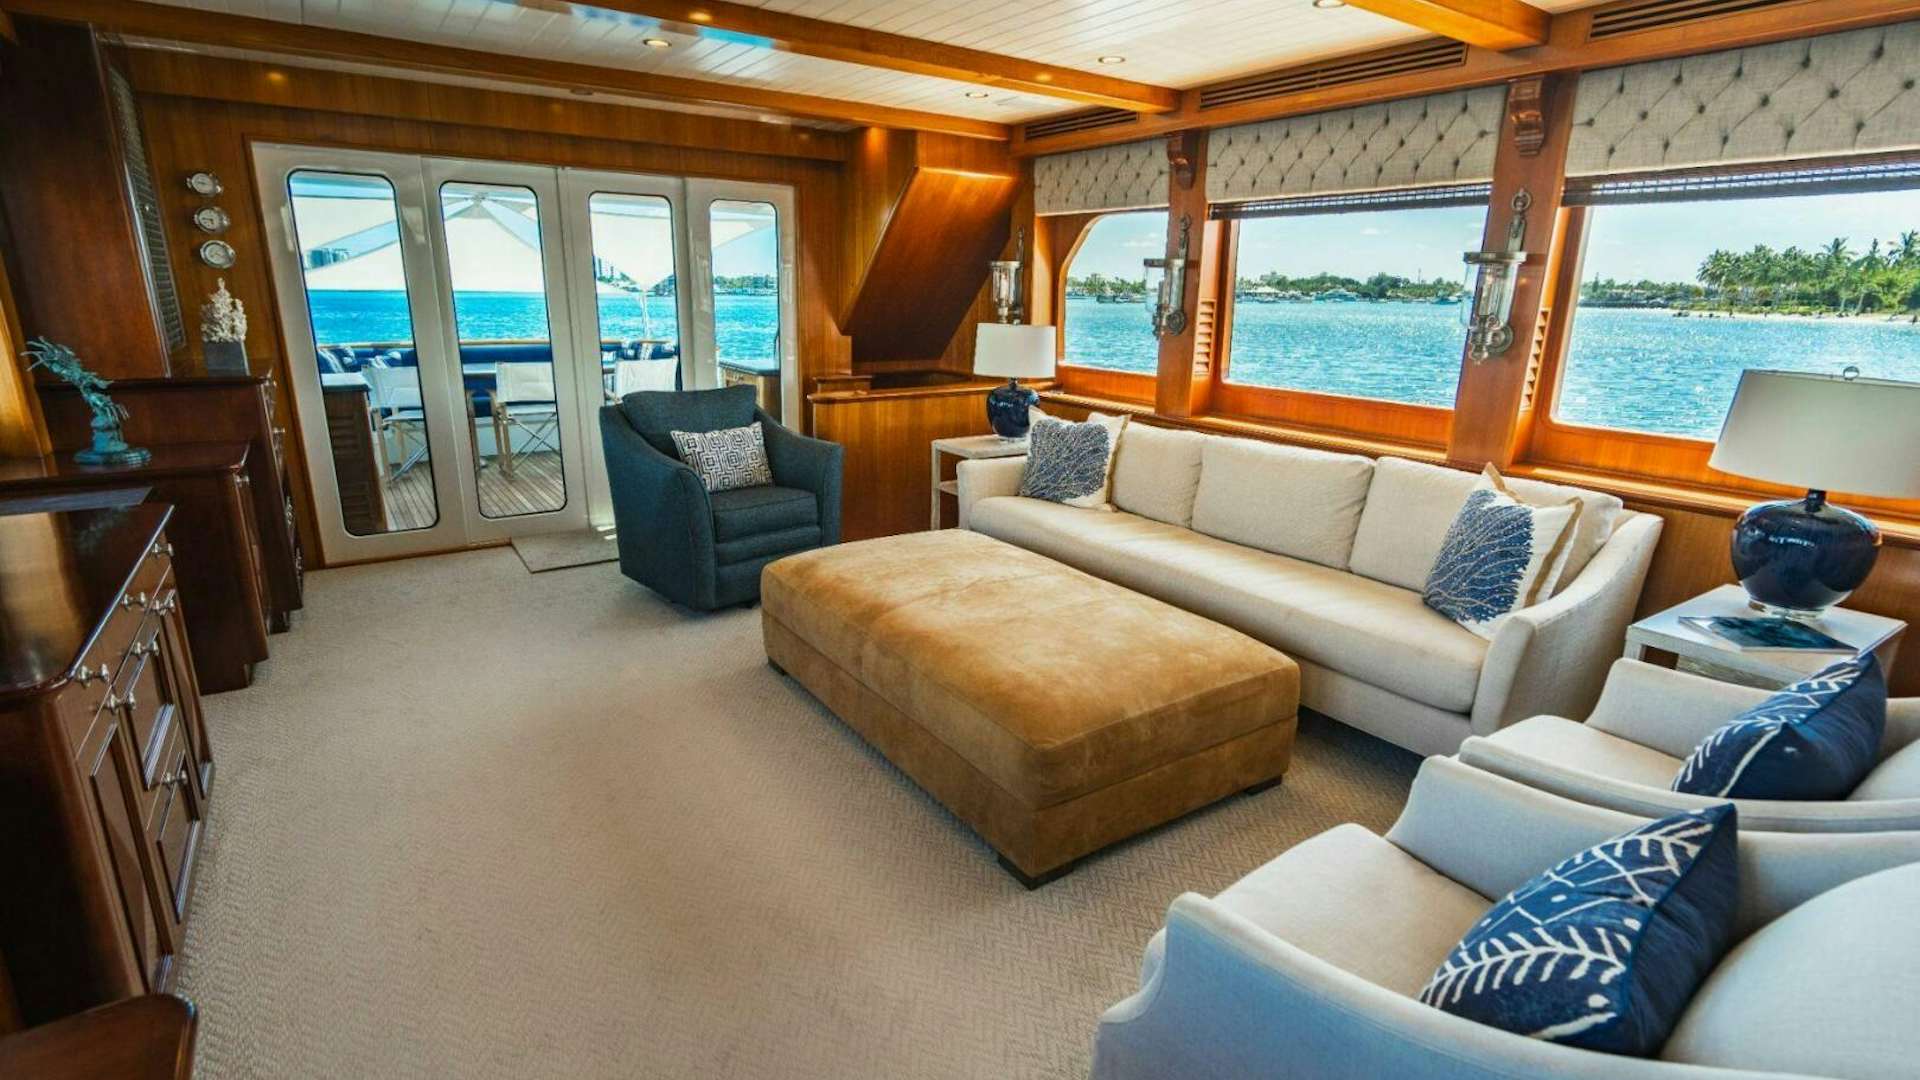 Moonshot
Yacht for Sale